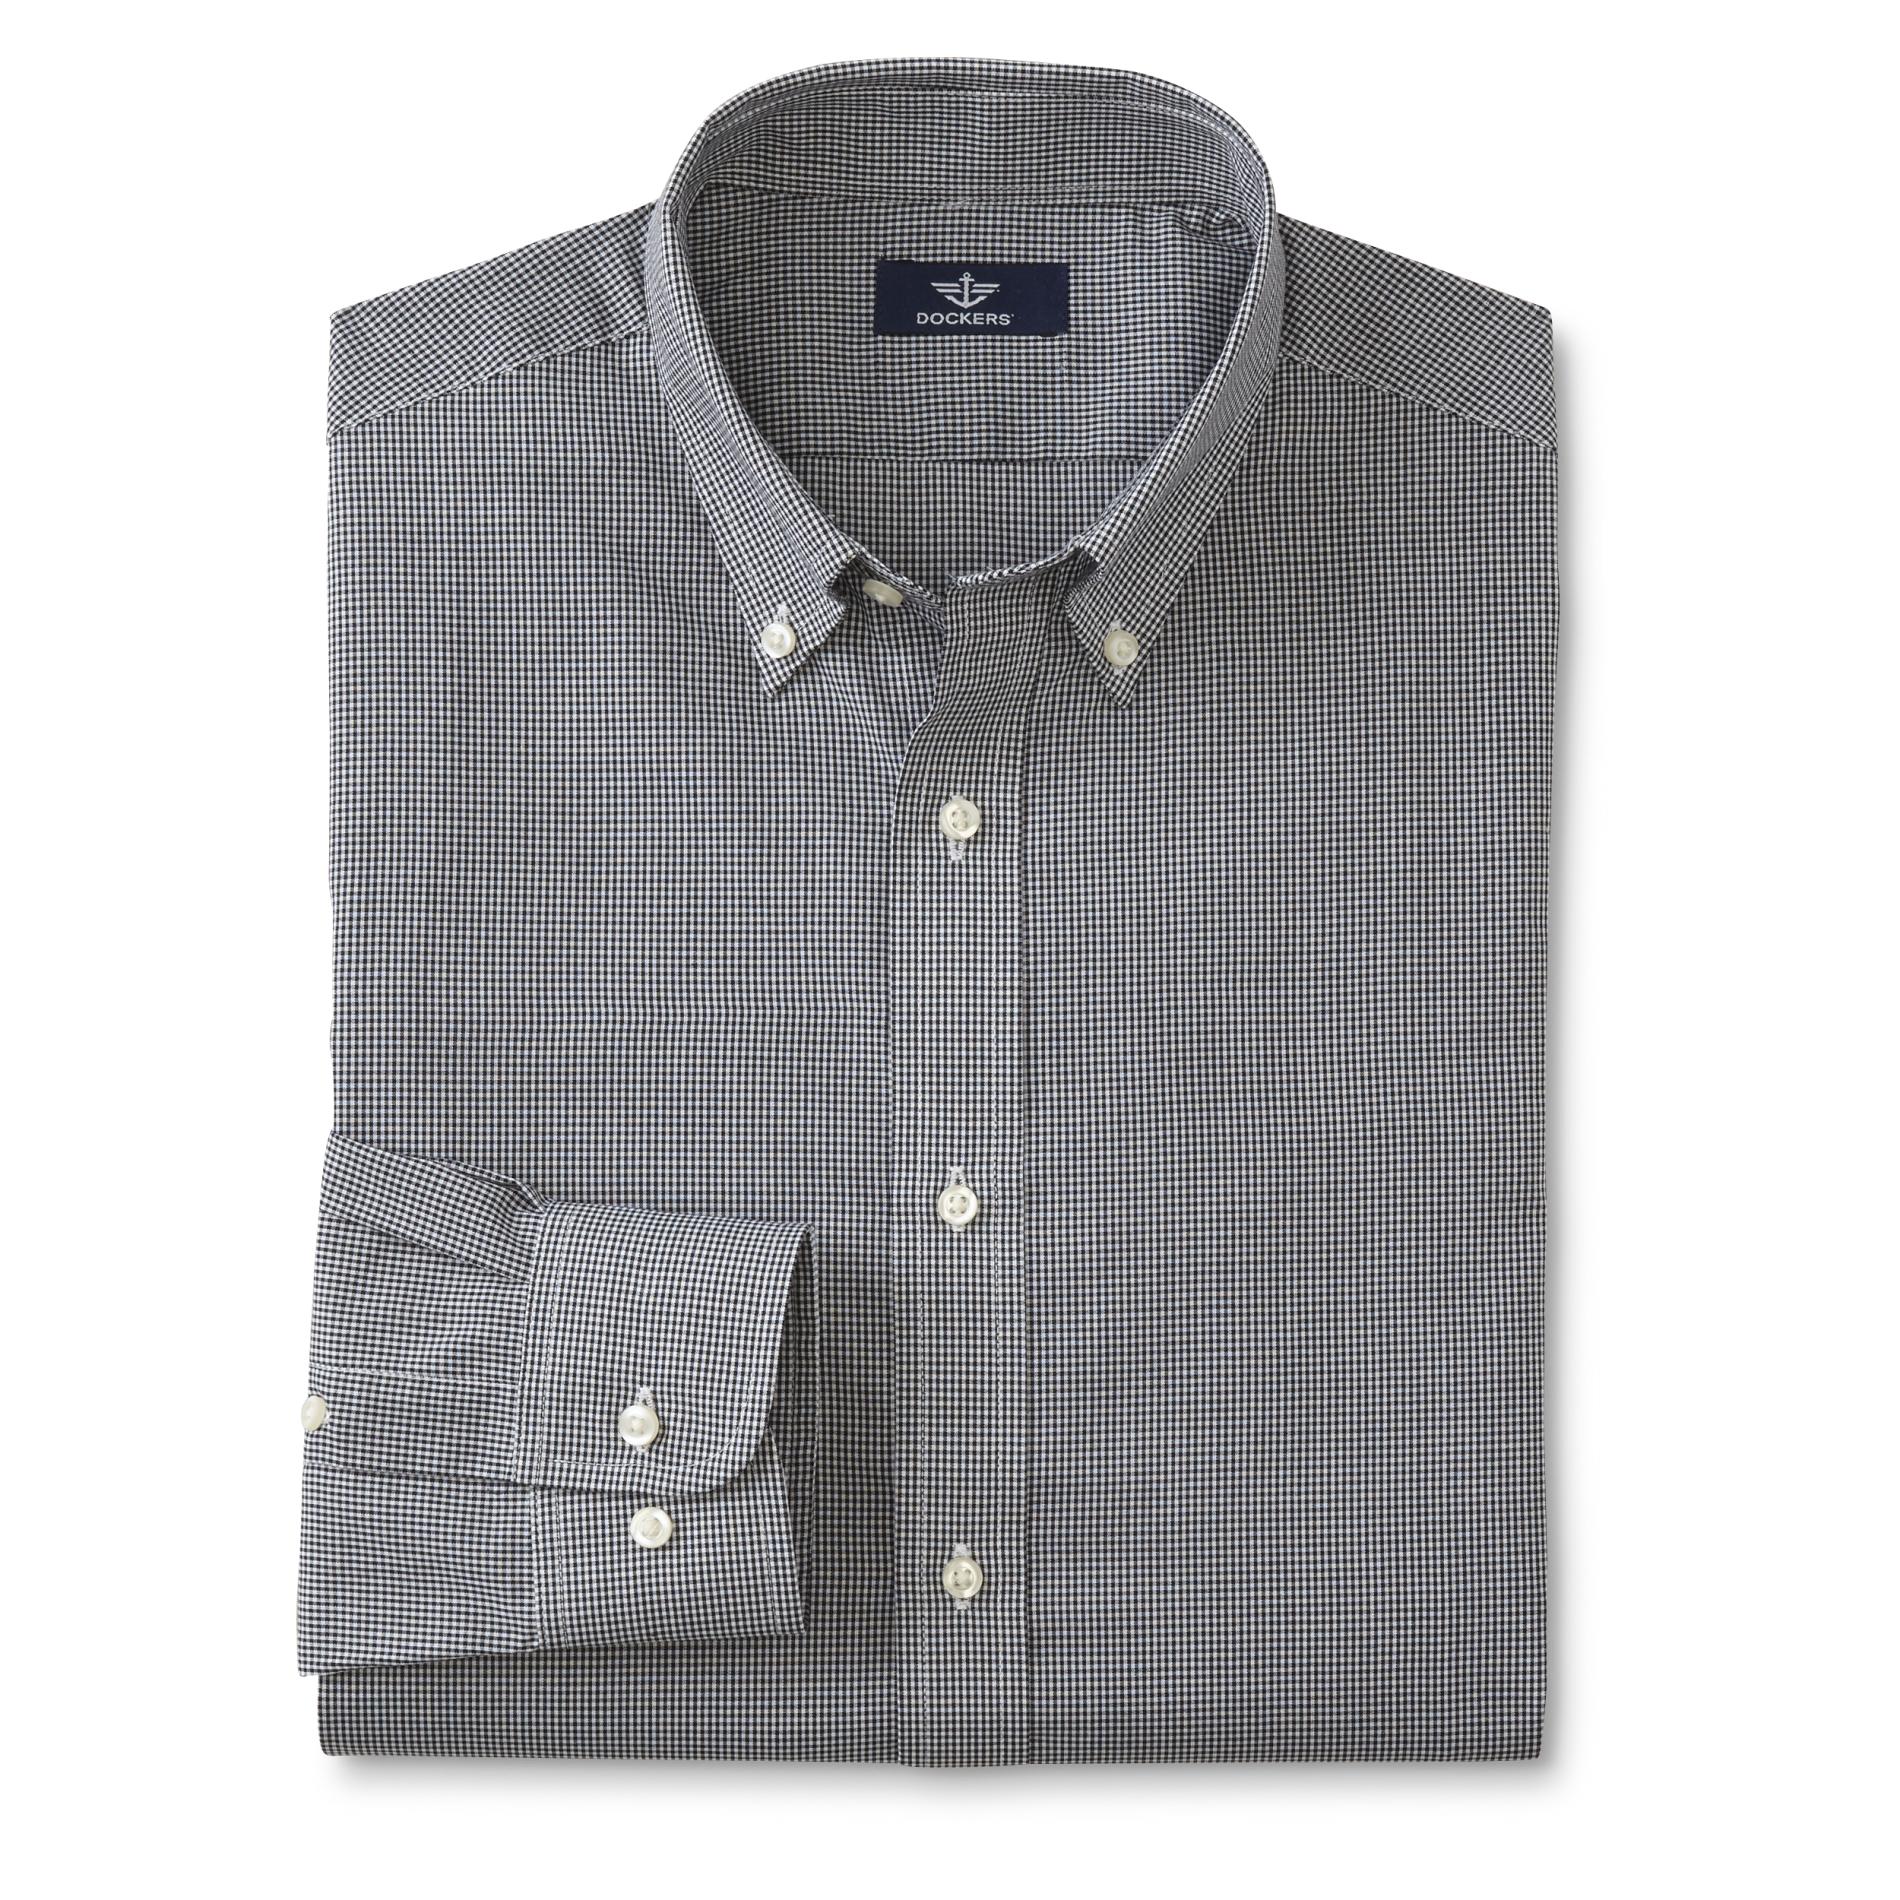 Dockers Men's Fitted Sport Shirt - Checkered